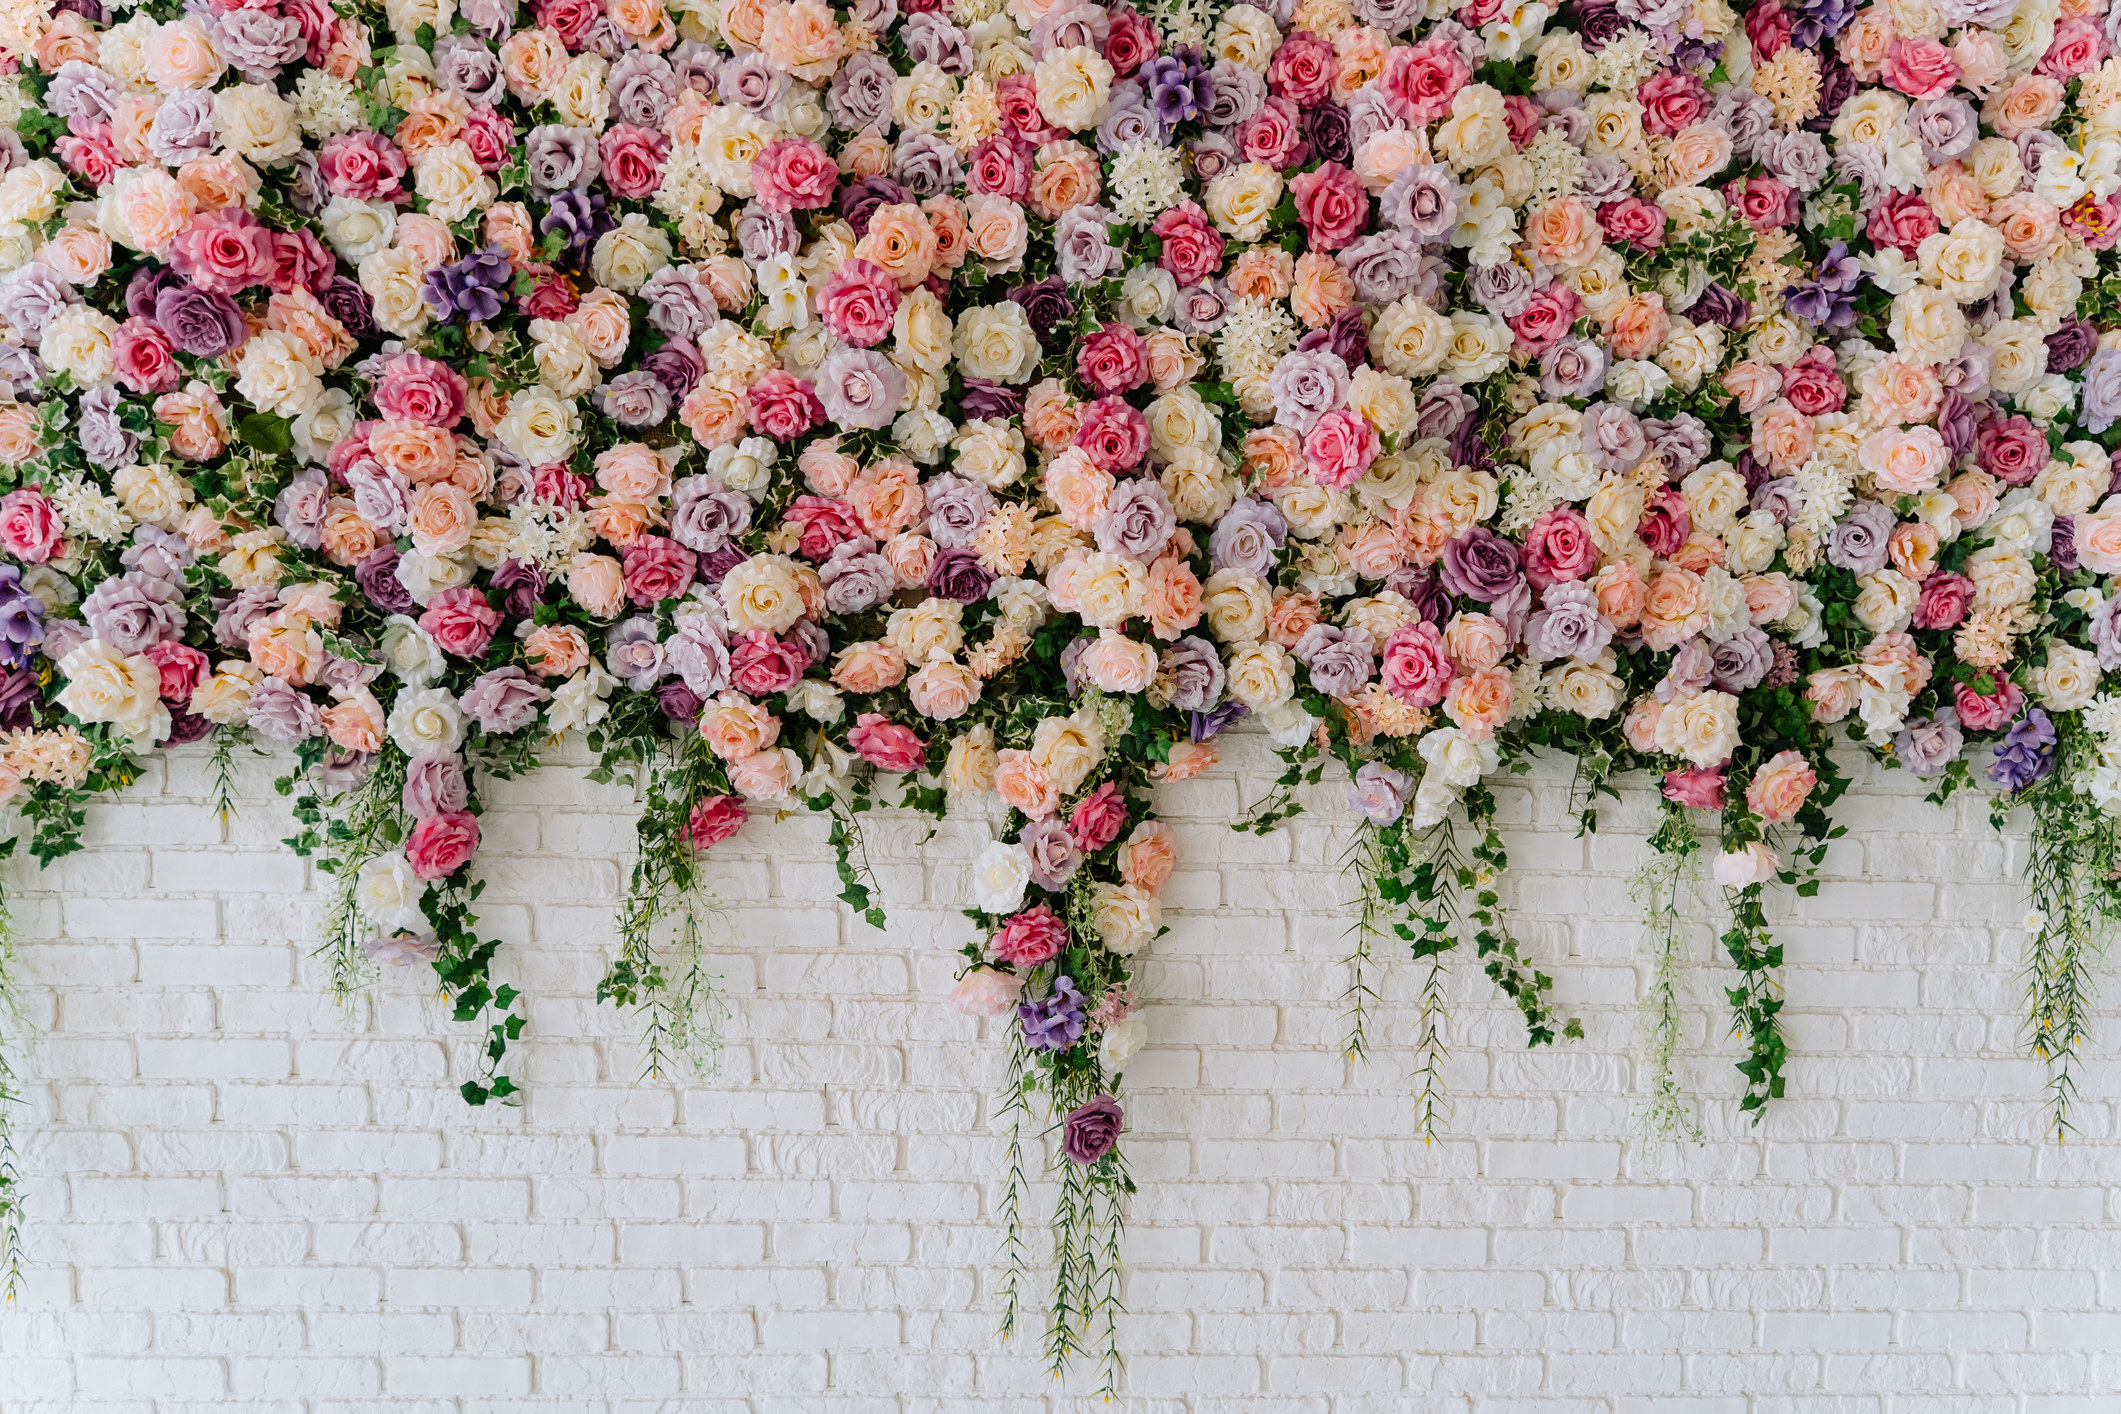 A wall of flowers